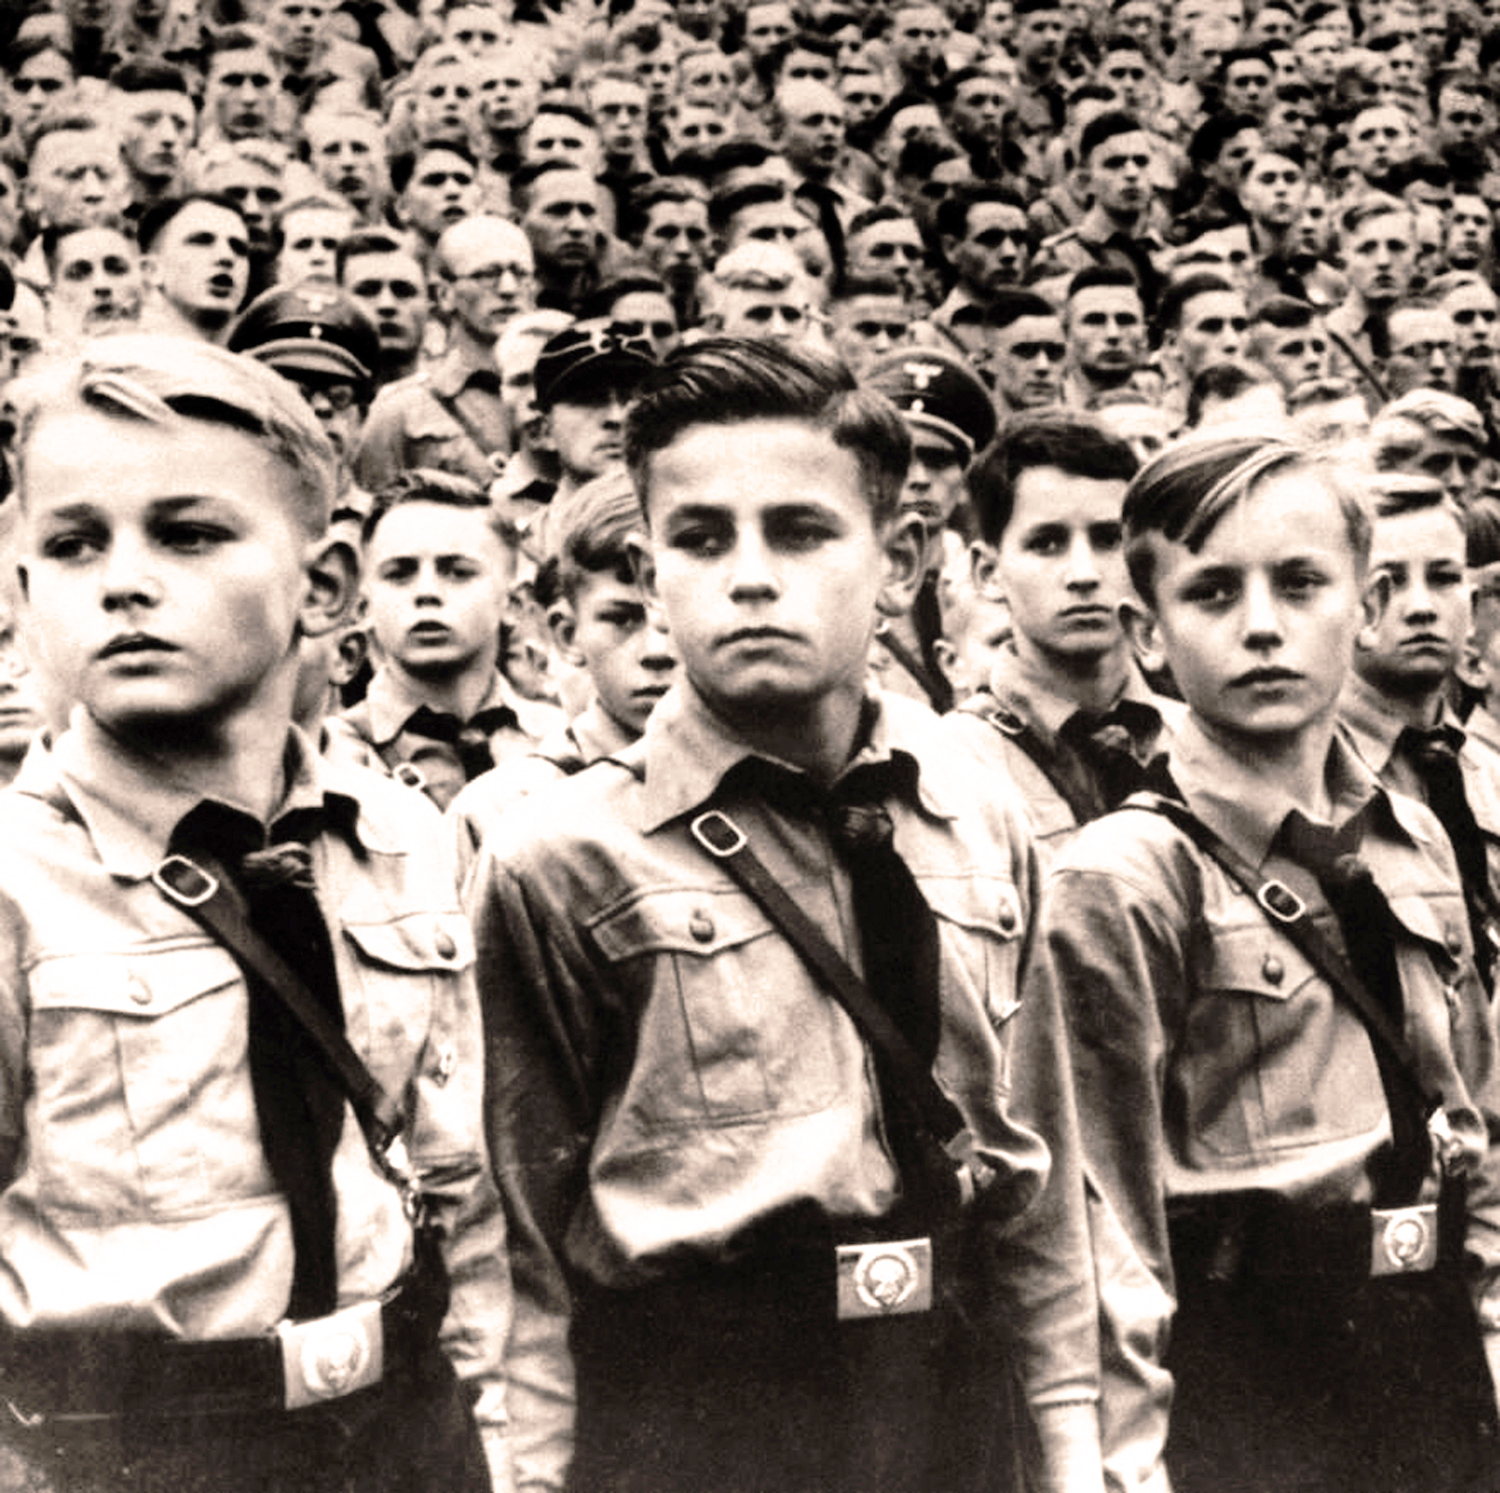 Black and white photograph of young boys at a Hitler Youth rally.